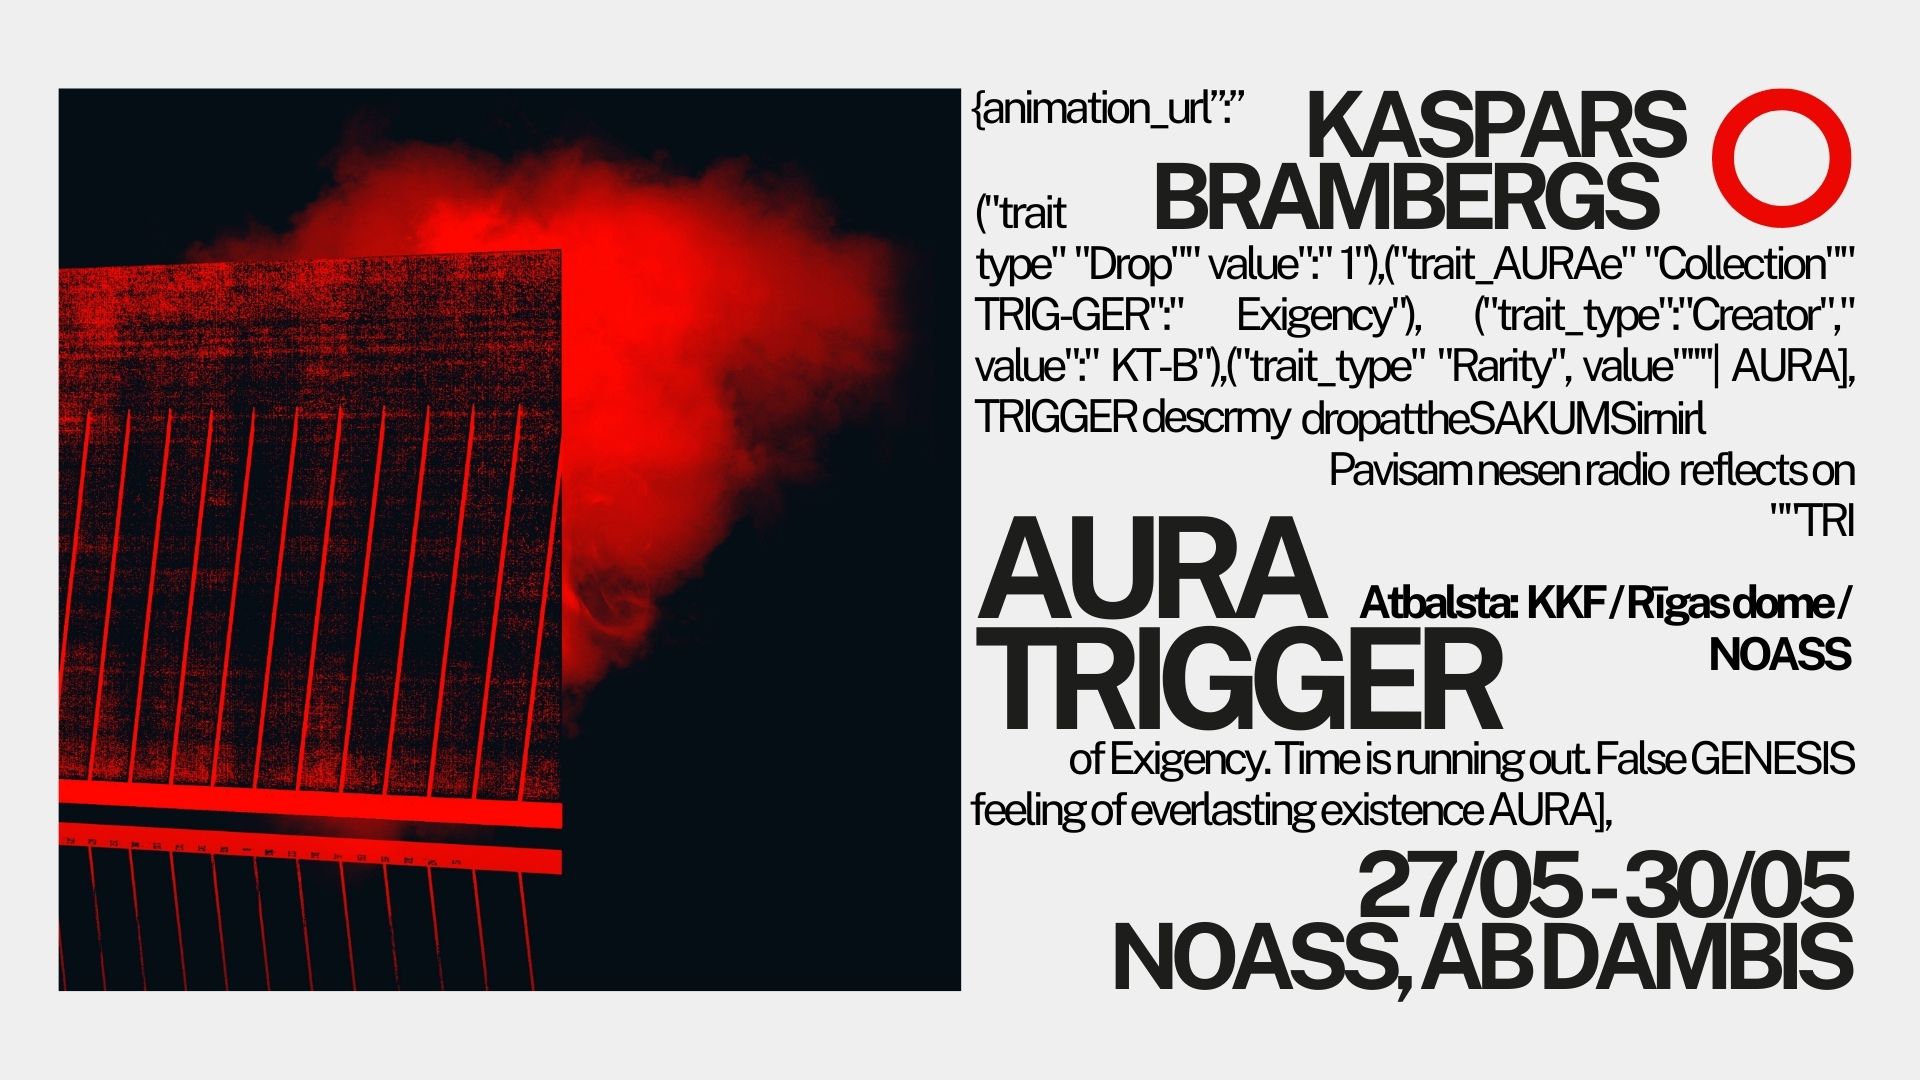 event poster about art exhibition by Kaspars Brambergs